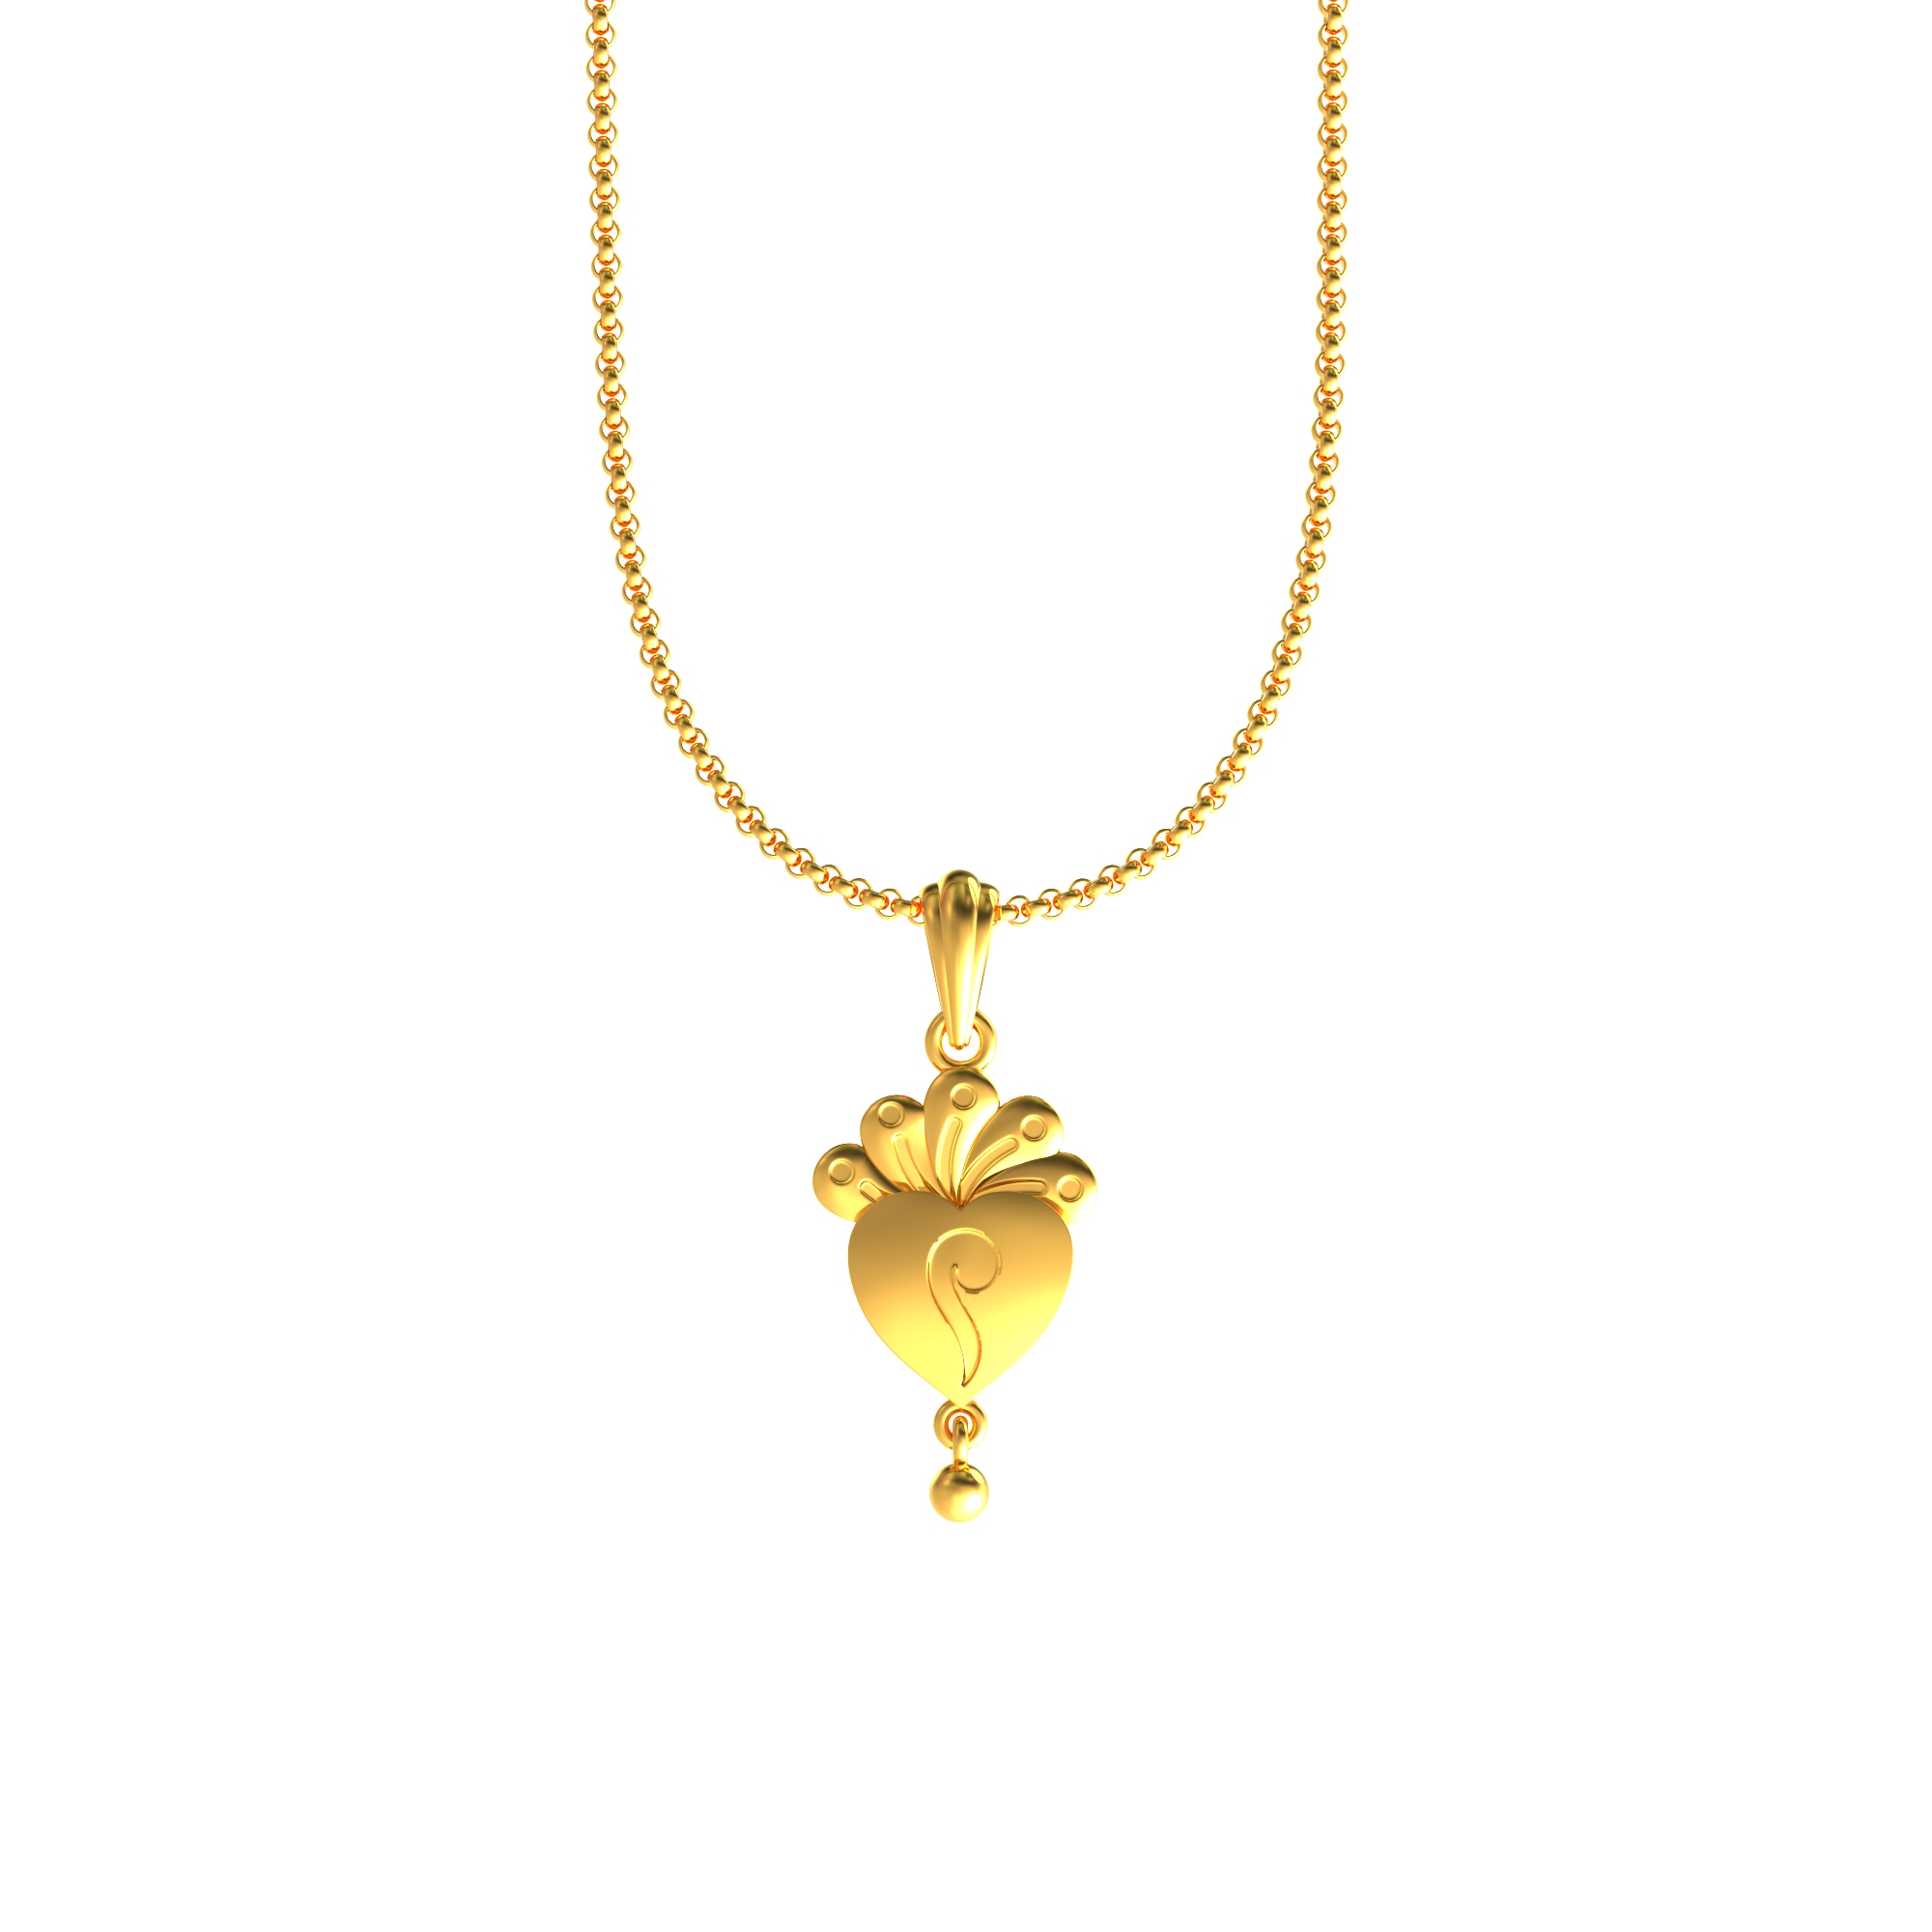 Traditional Heart Shaped Gold Pendant